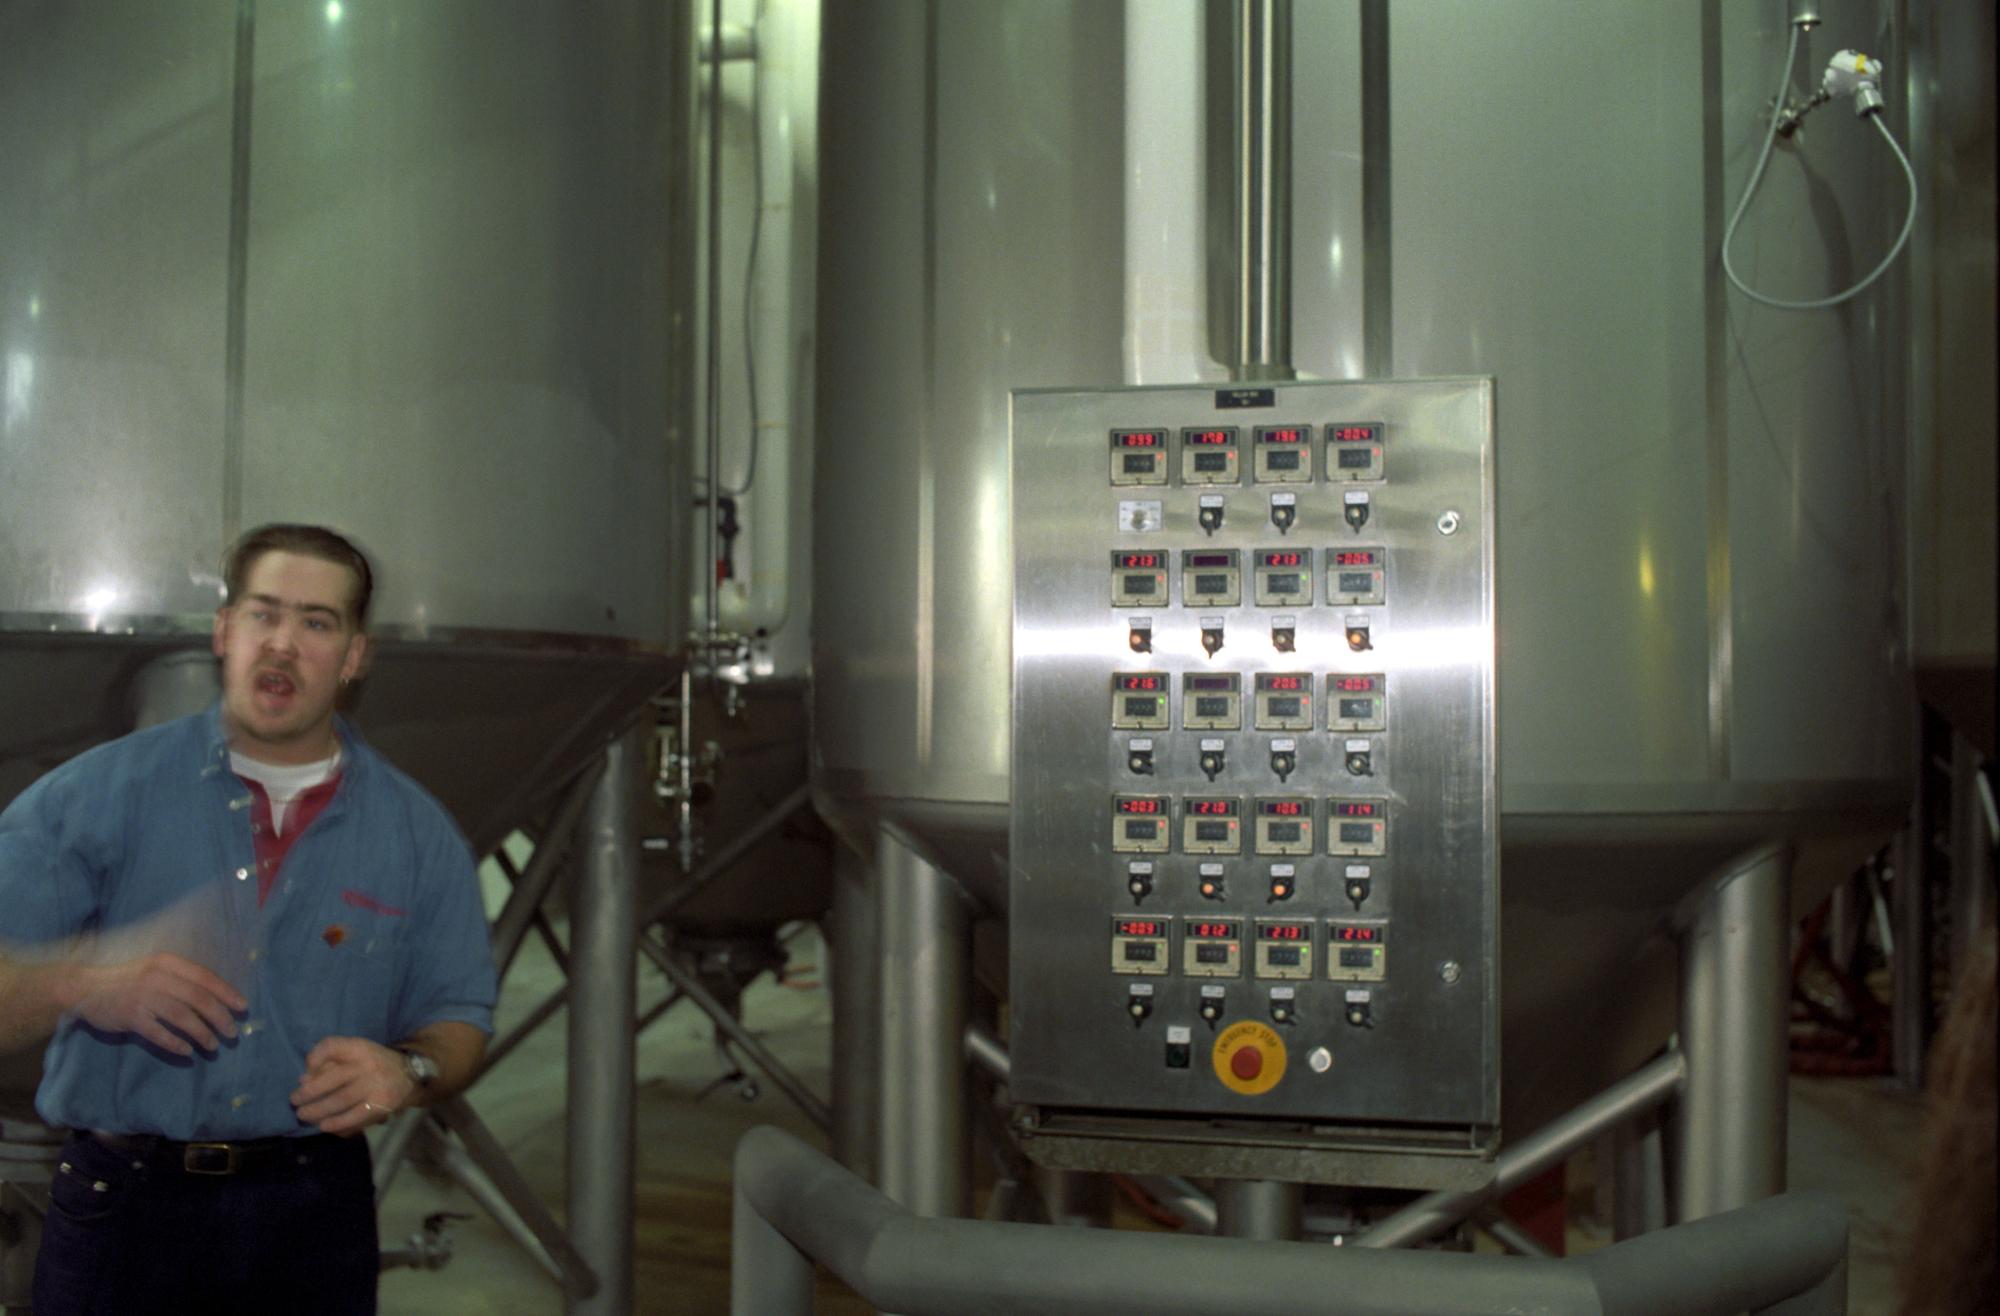 Seattle (1994) - Brewery Tour #3